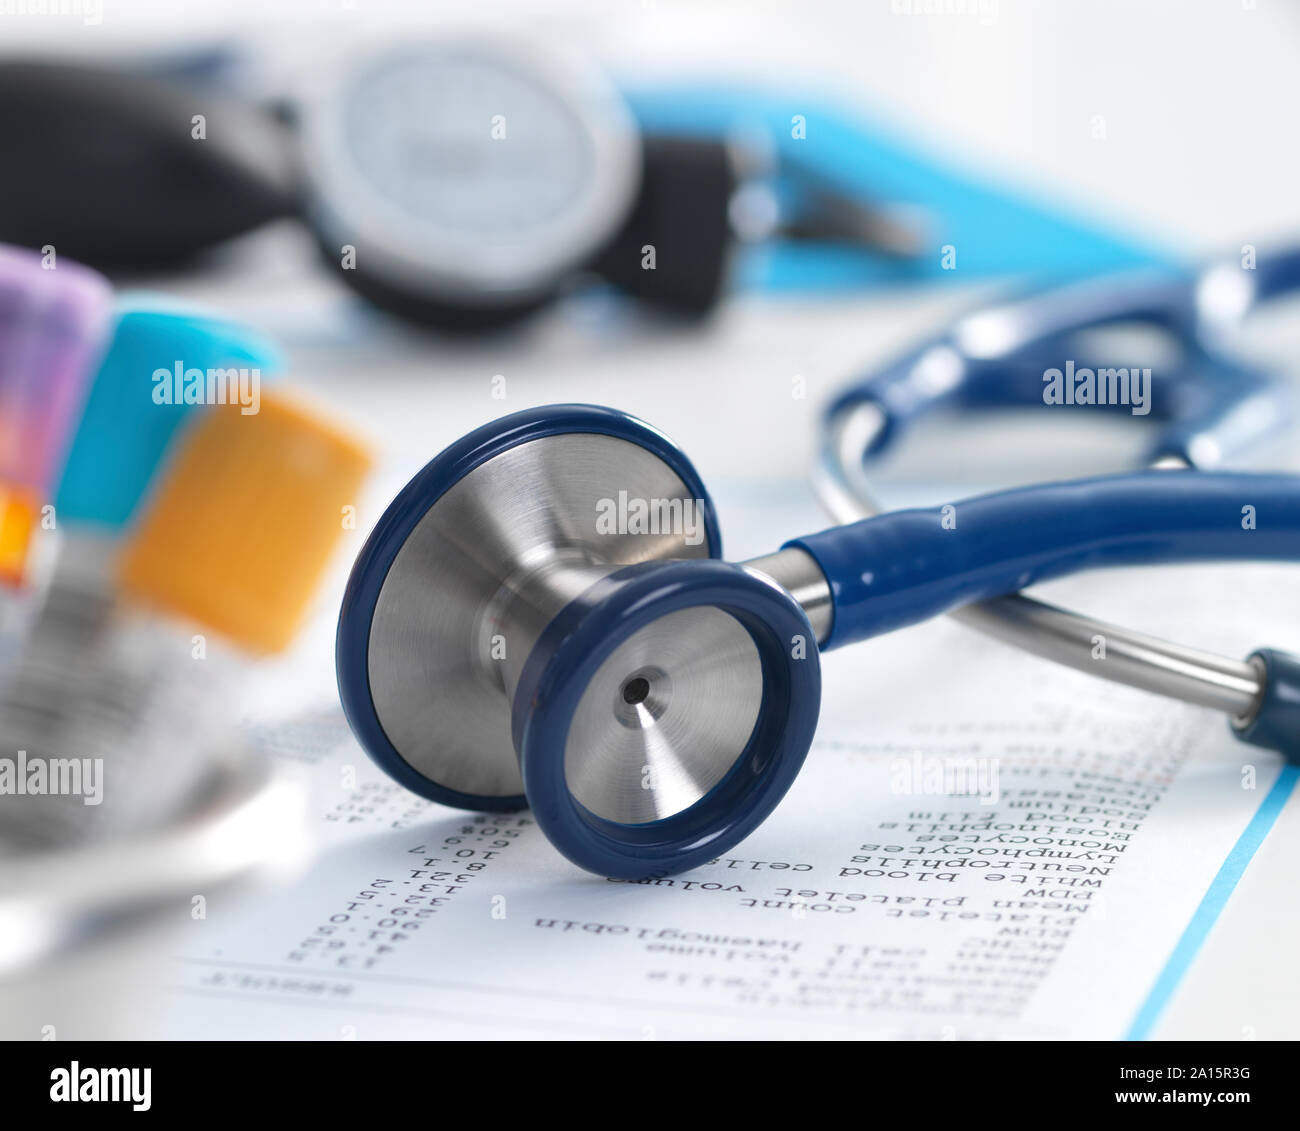 Health Screening, A stethoscope on a patients blood results after a a consultation Stock Photo